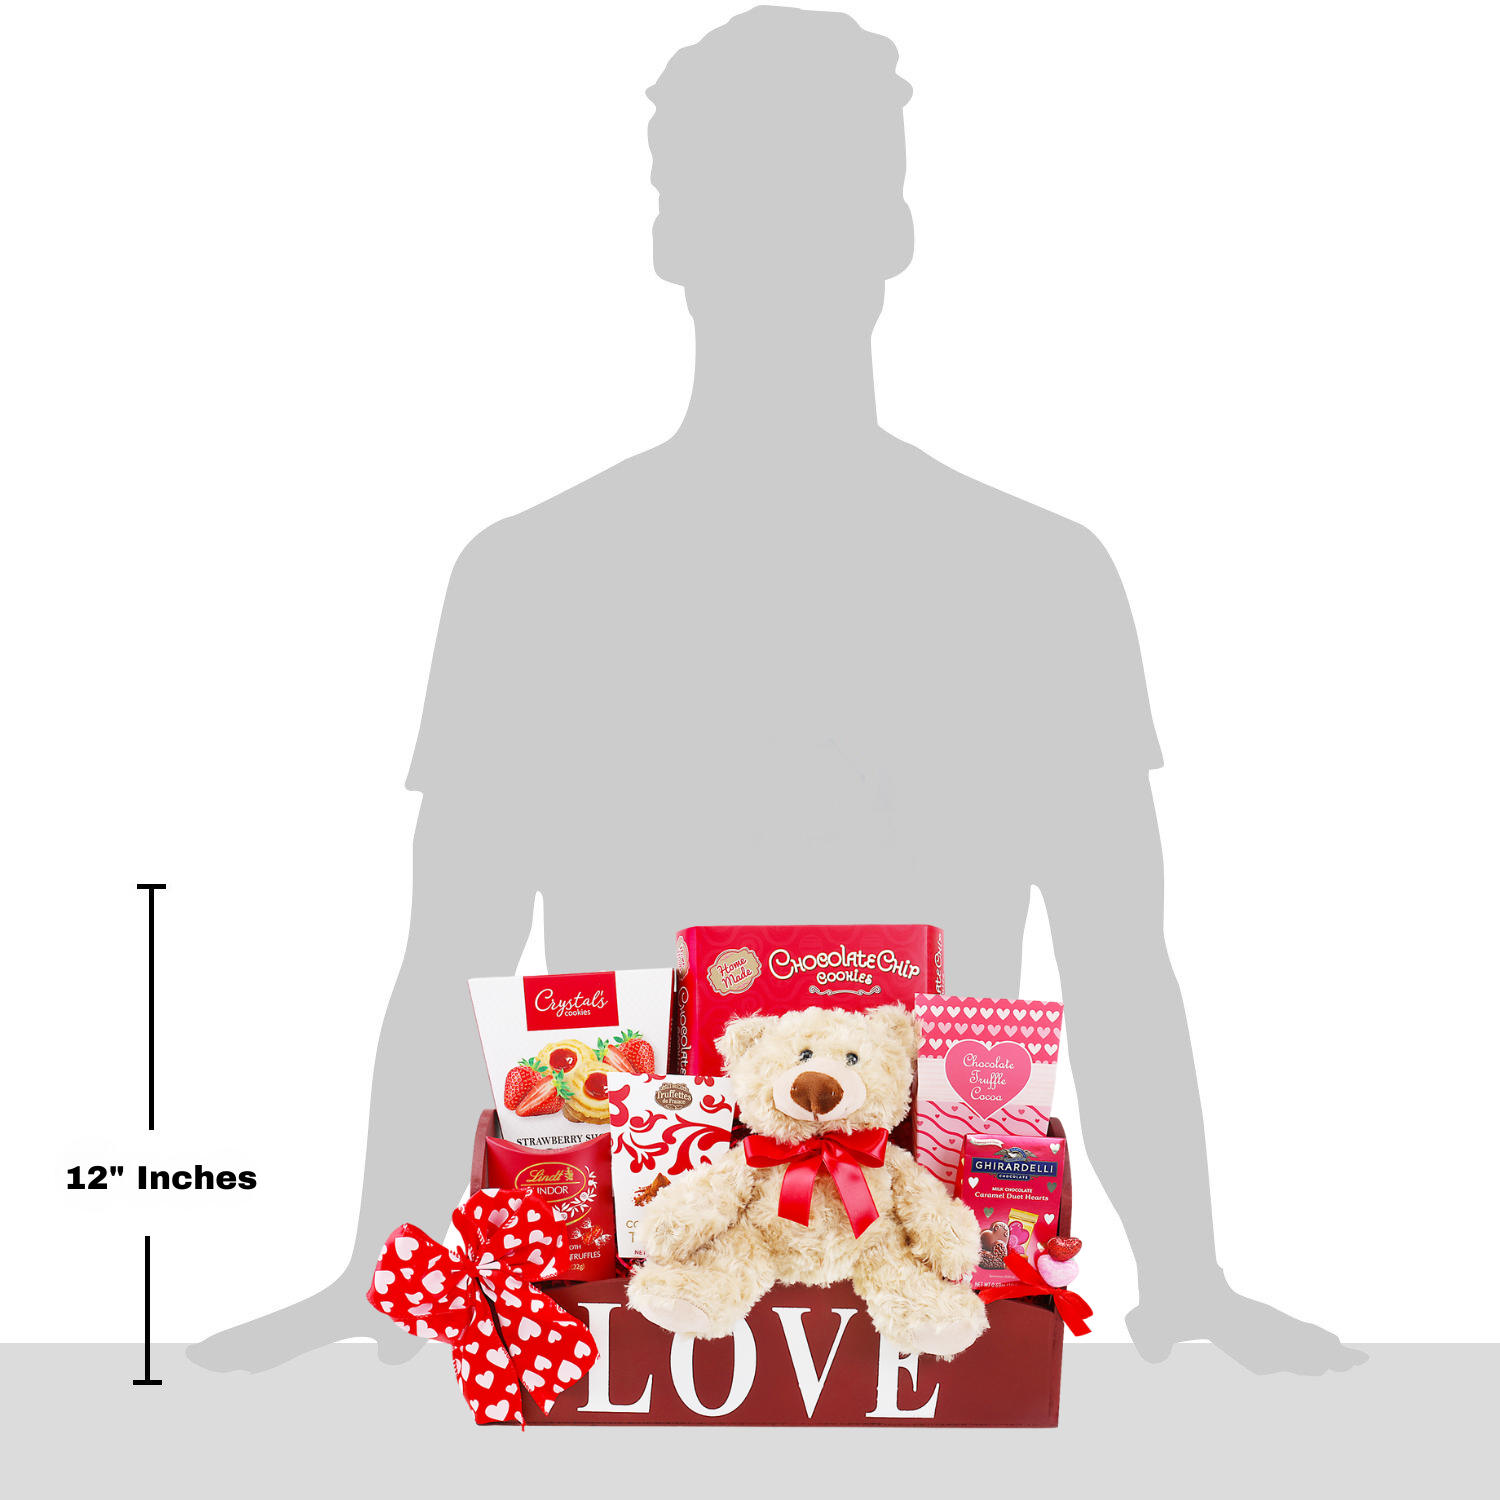 Gift over man illustration to demonstrate height.